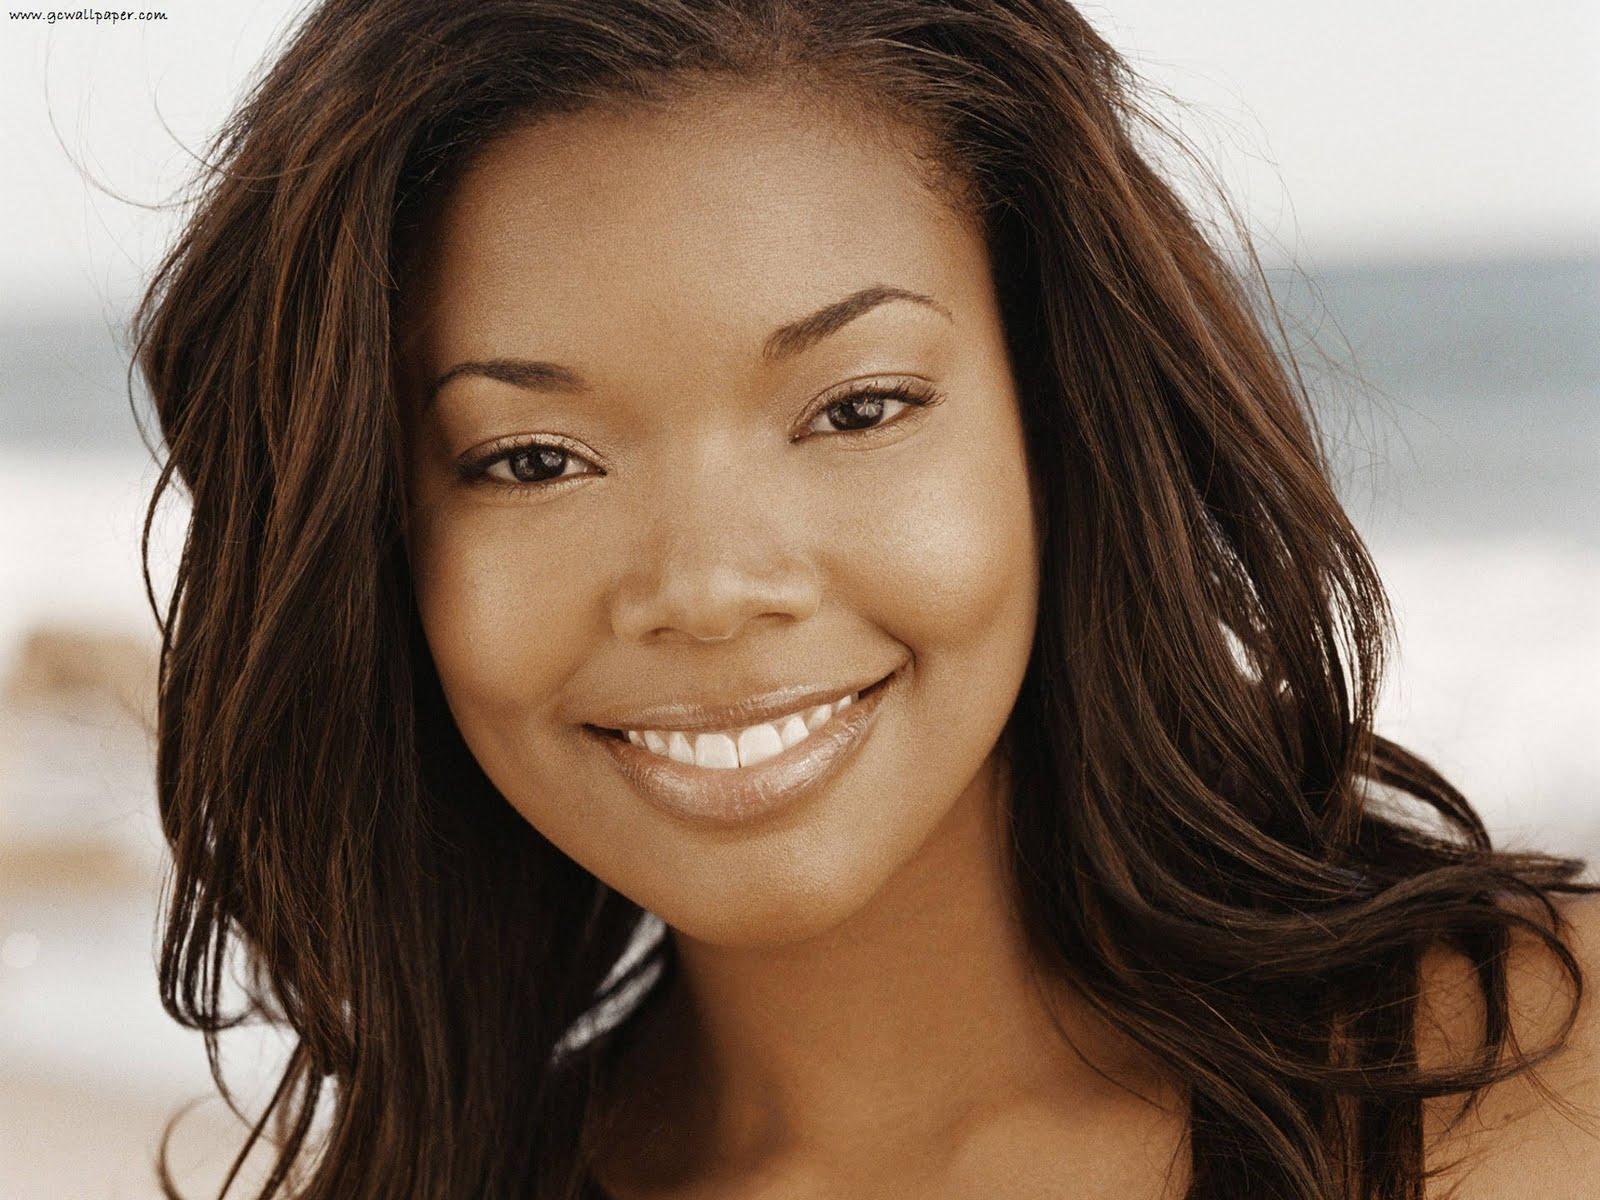 G C W: Gabrielle Union Wallpaper and Biography